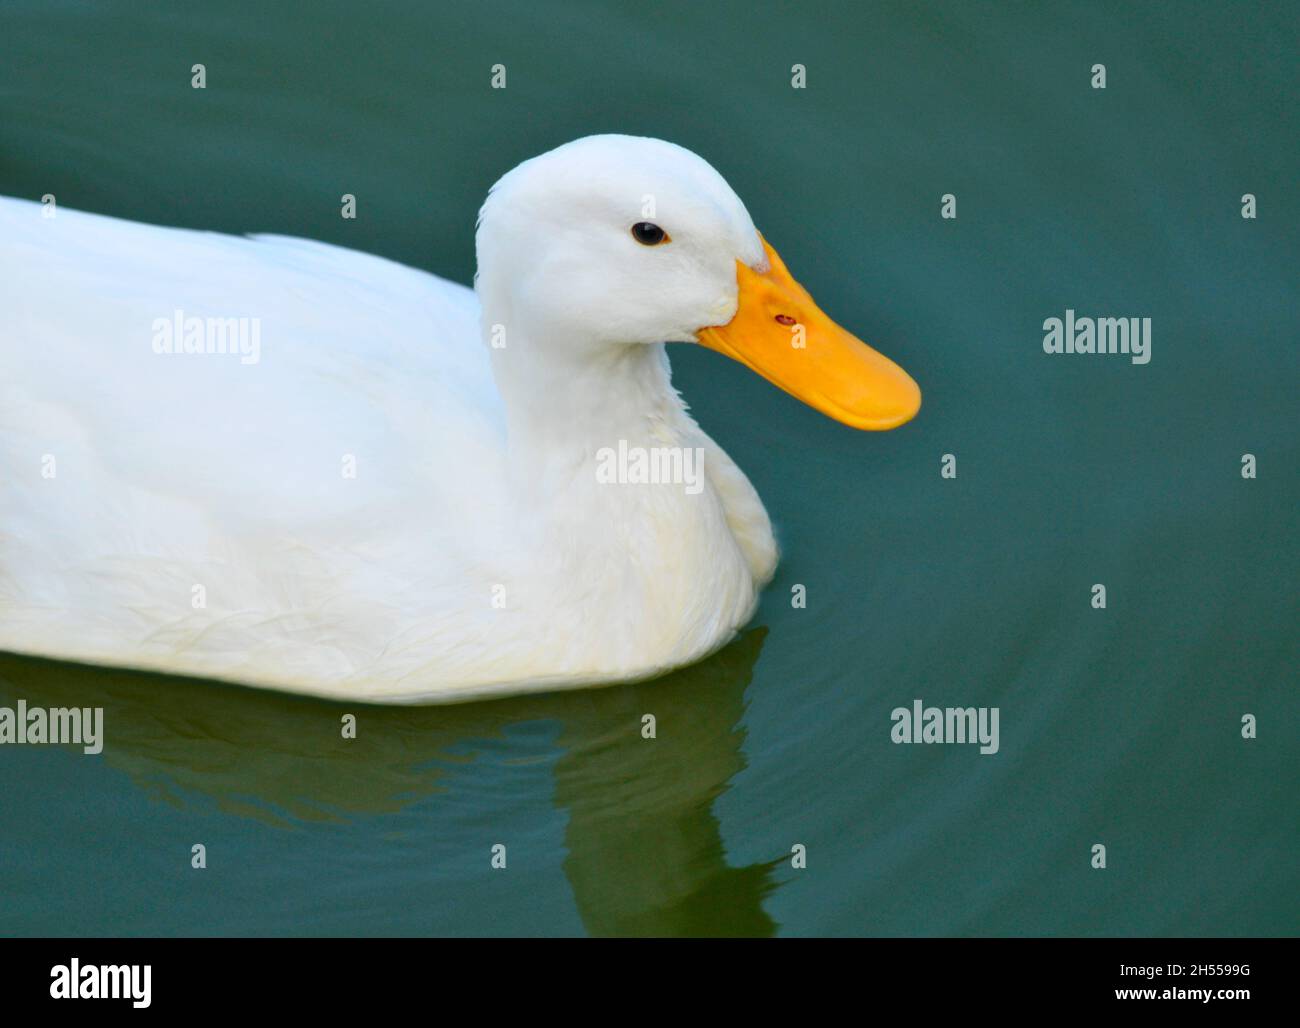 A duck in water Stock Photo